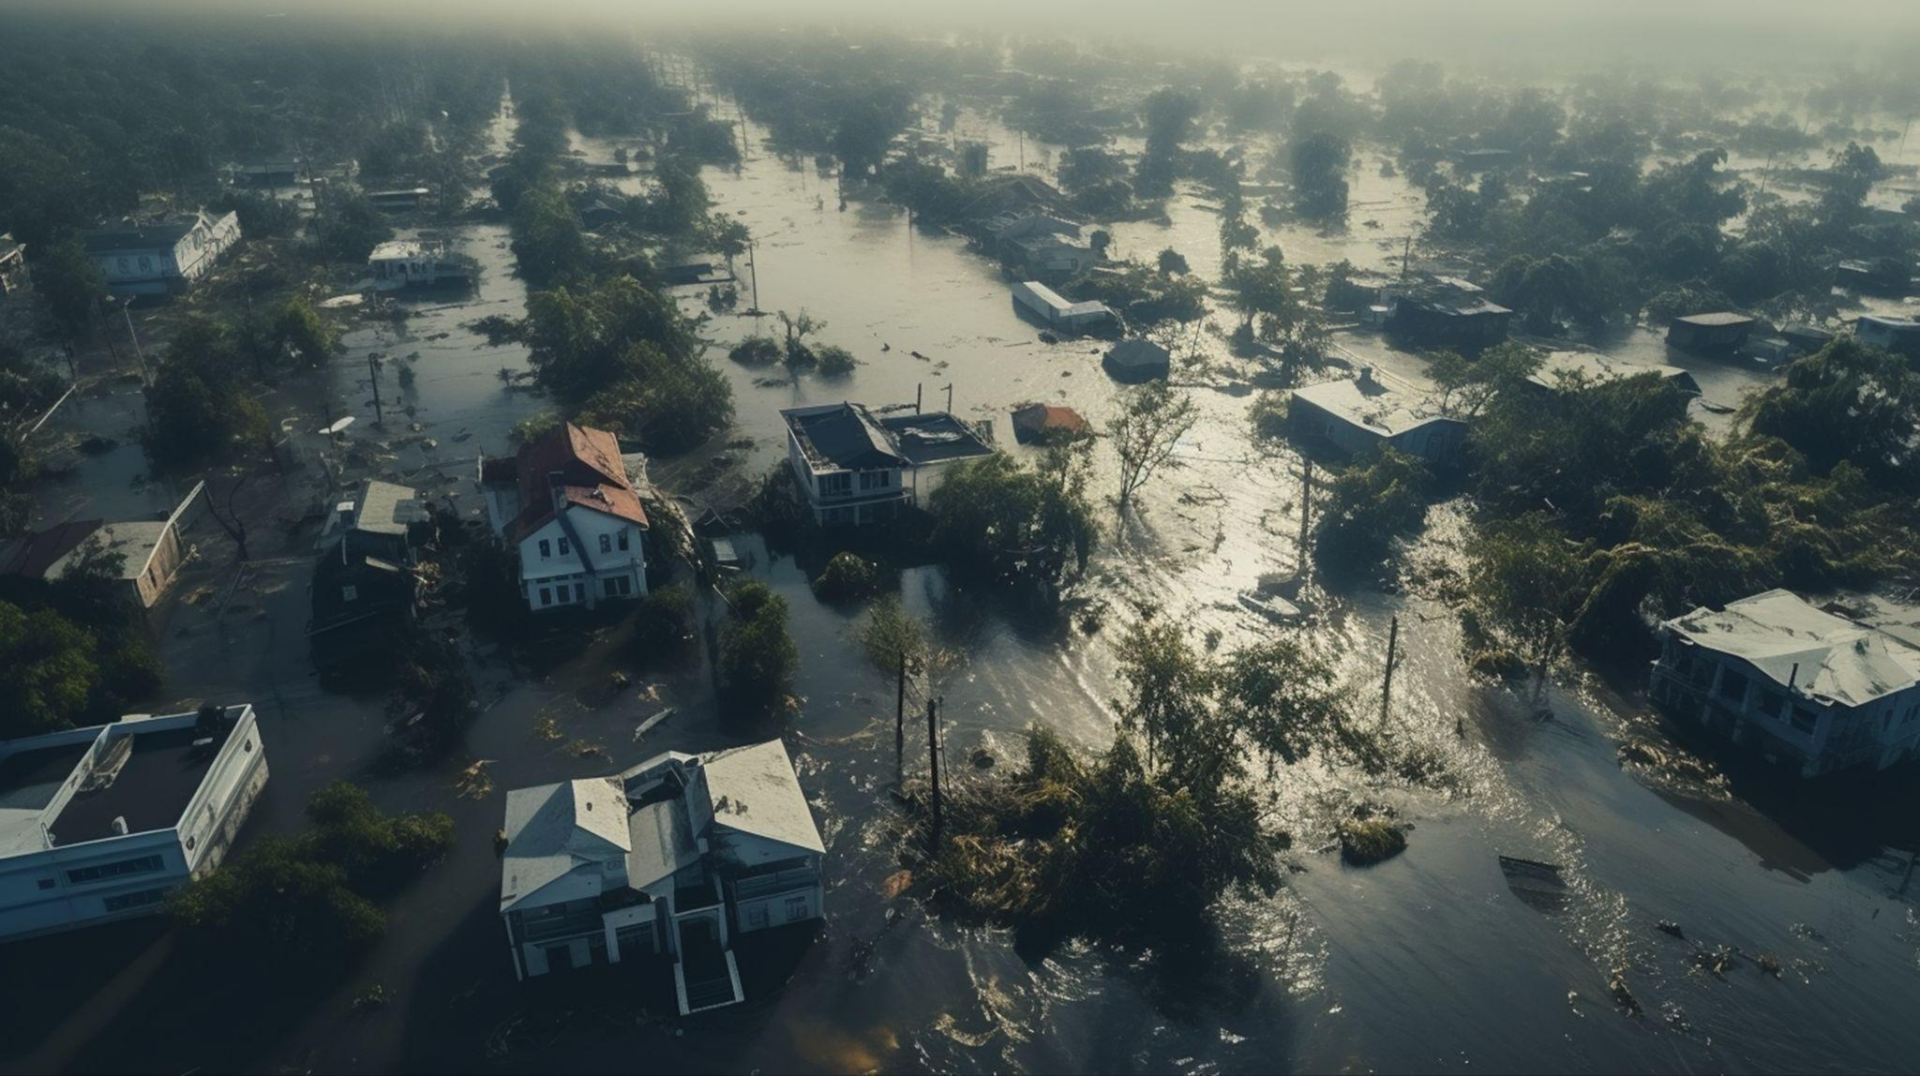 How do you Safeguard Your Home and Business During an East Coast Hurricane?